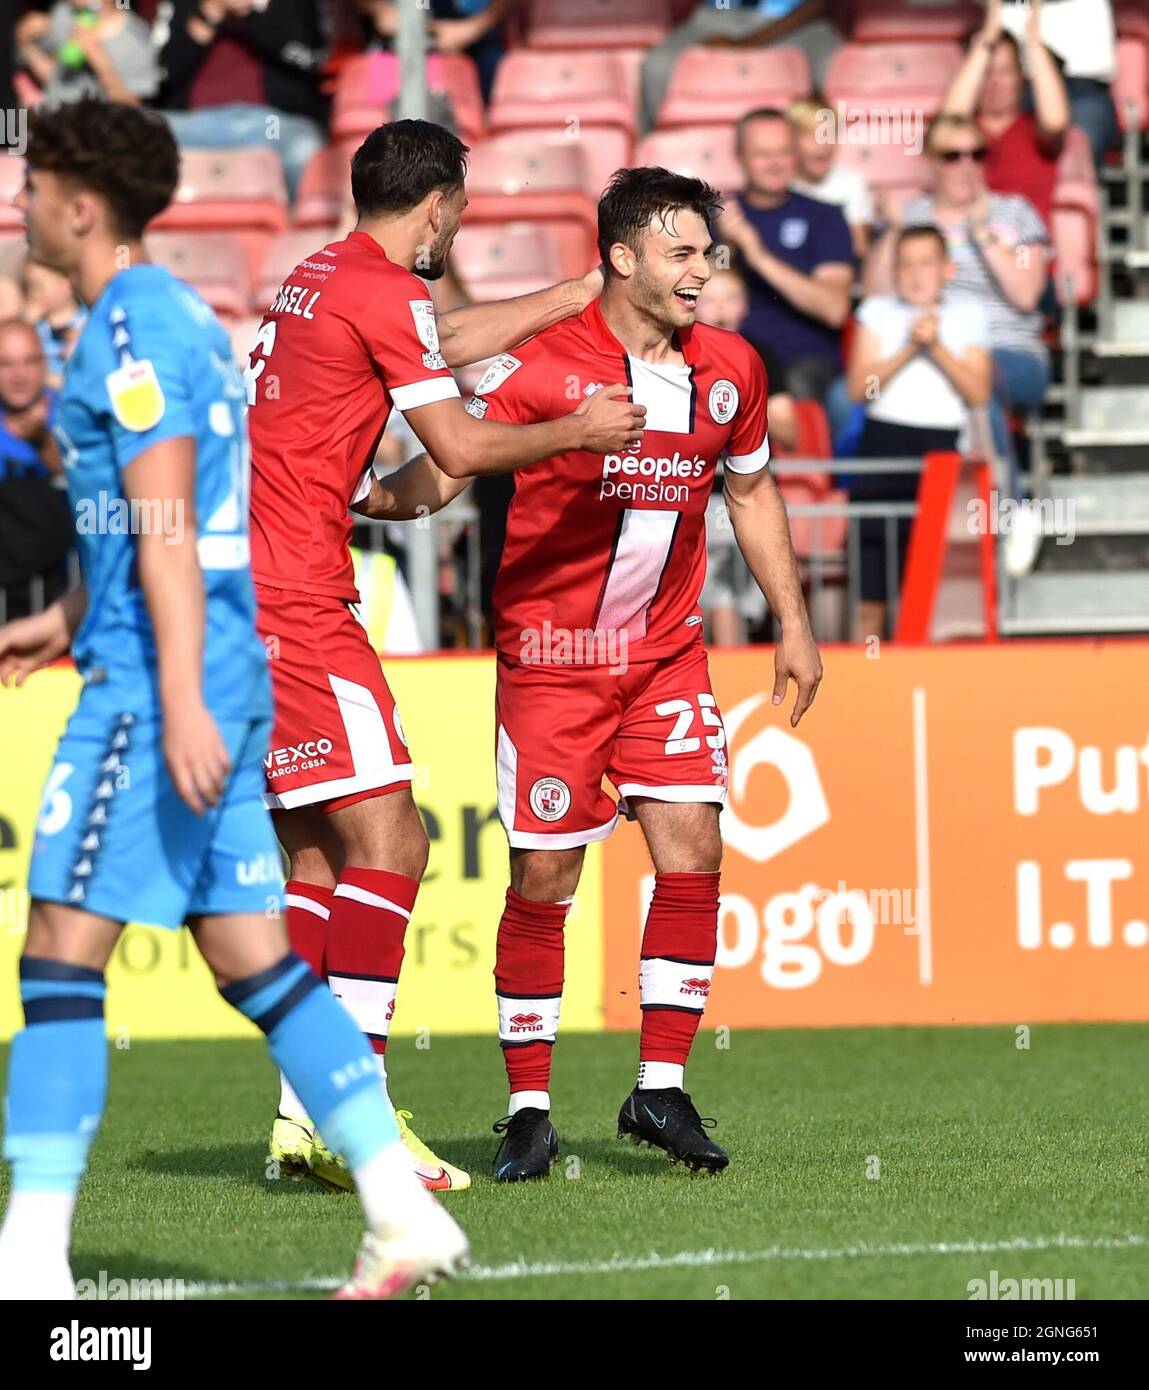 Crawley Sussex UK 25th September 2021 - Nicholas Tsaroulla of Crawley celebrates after scoring their second goal during the Sky Bet League Two match between Crawley Town and Bradford City at the People's Pension Stadium  : Credit Simon Dack /TPI/ Alamy Live News Stock Photo